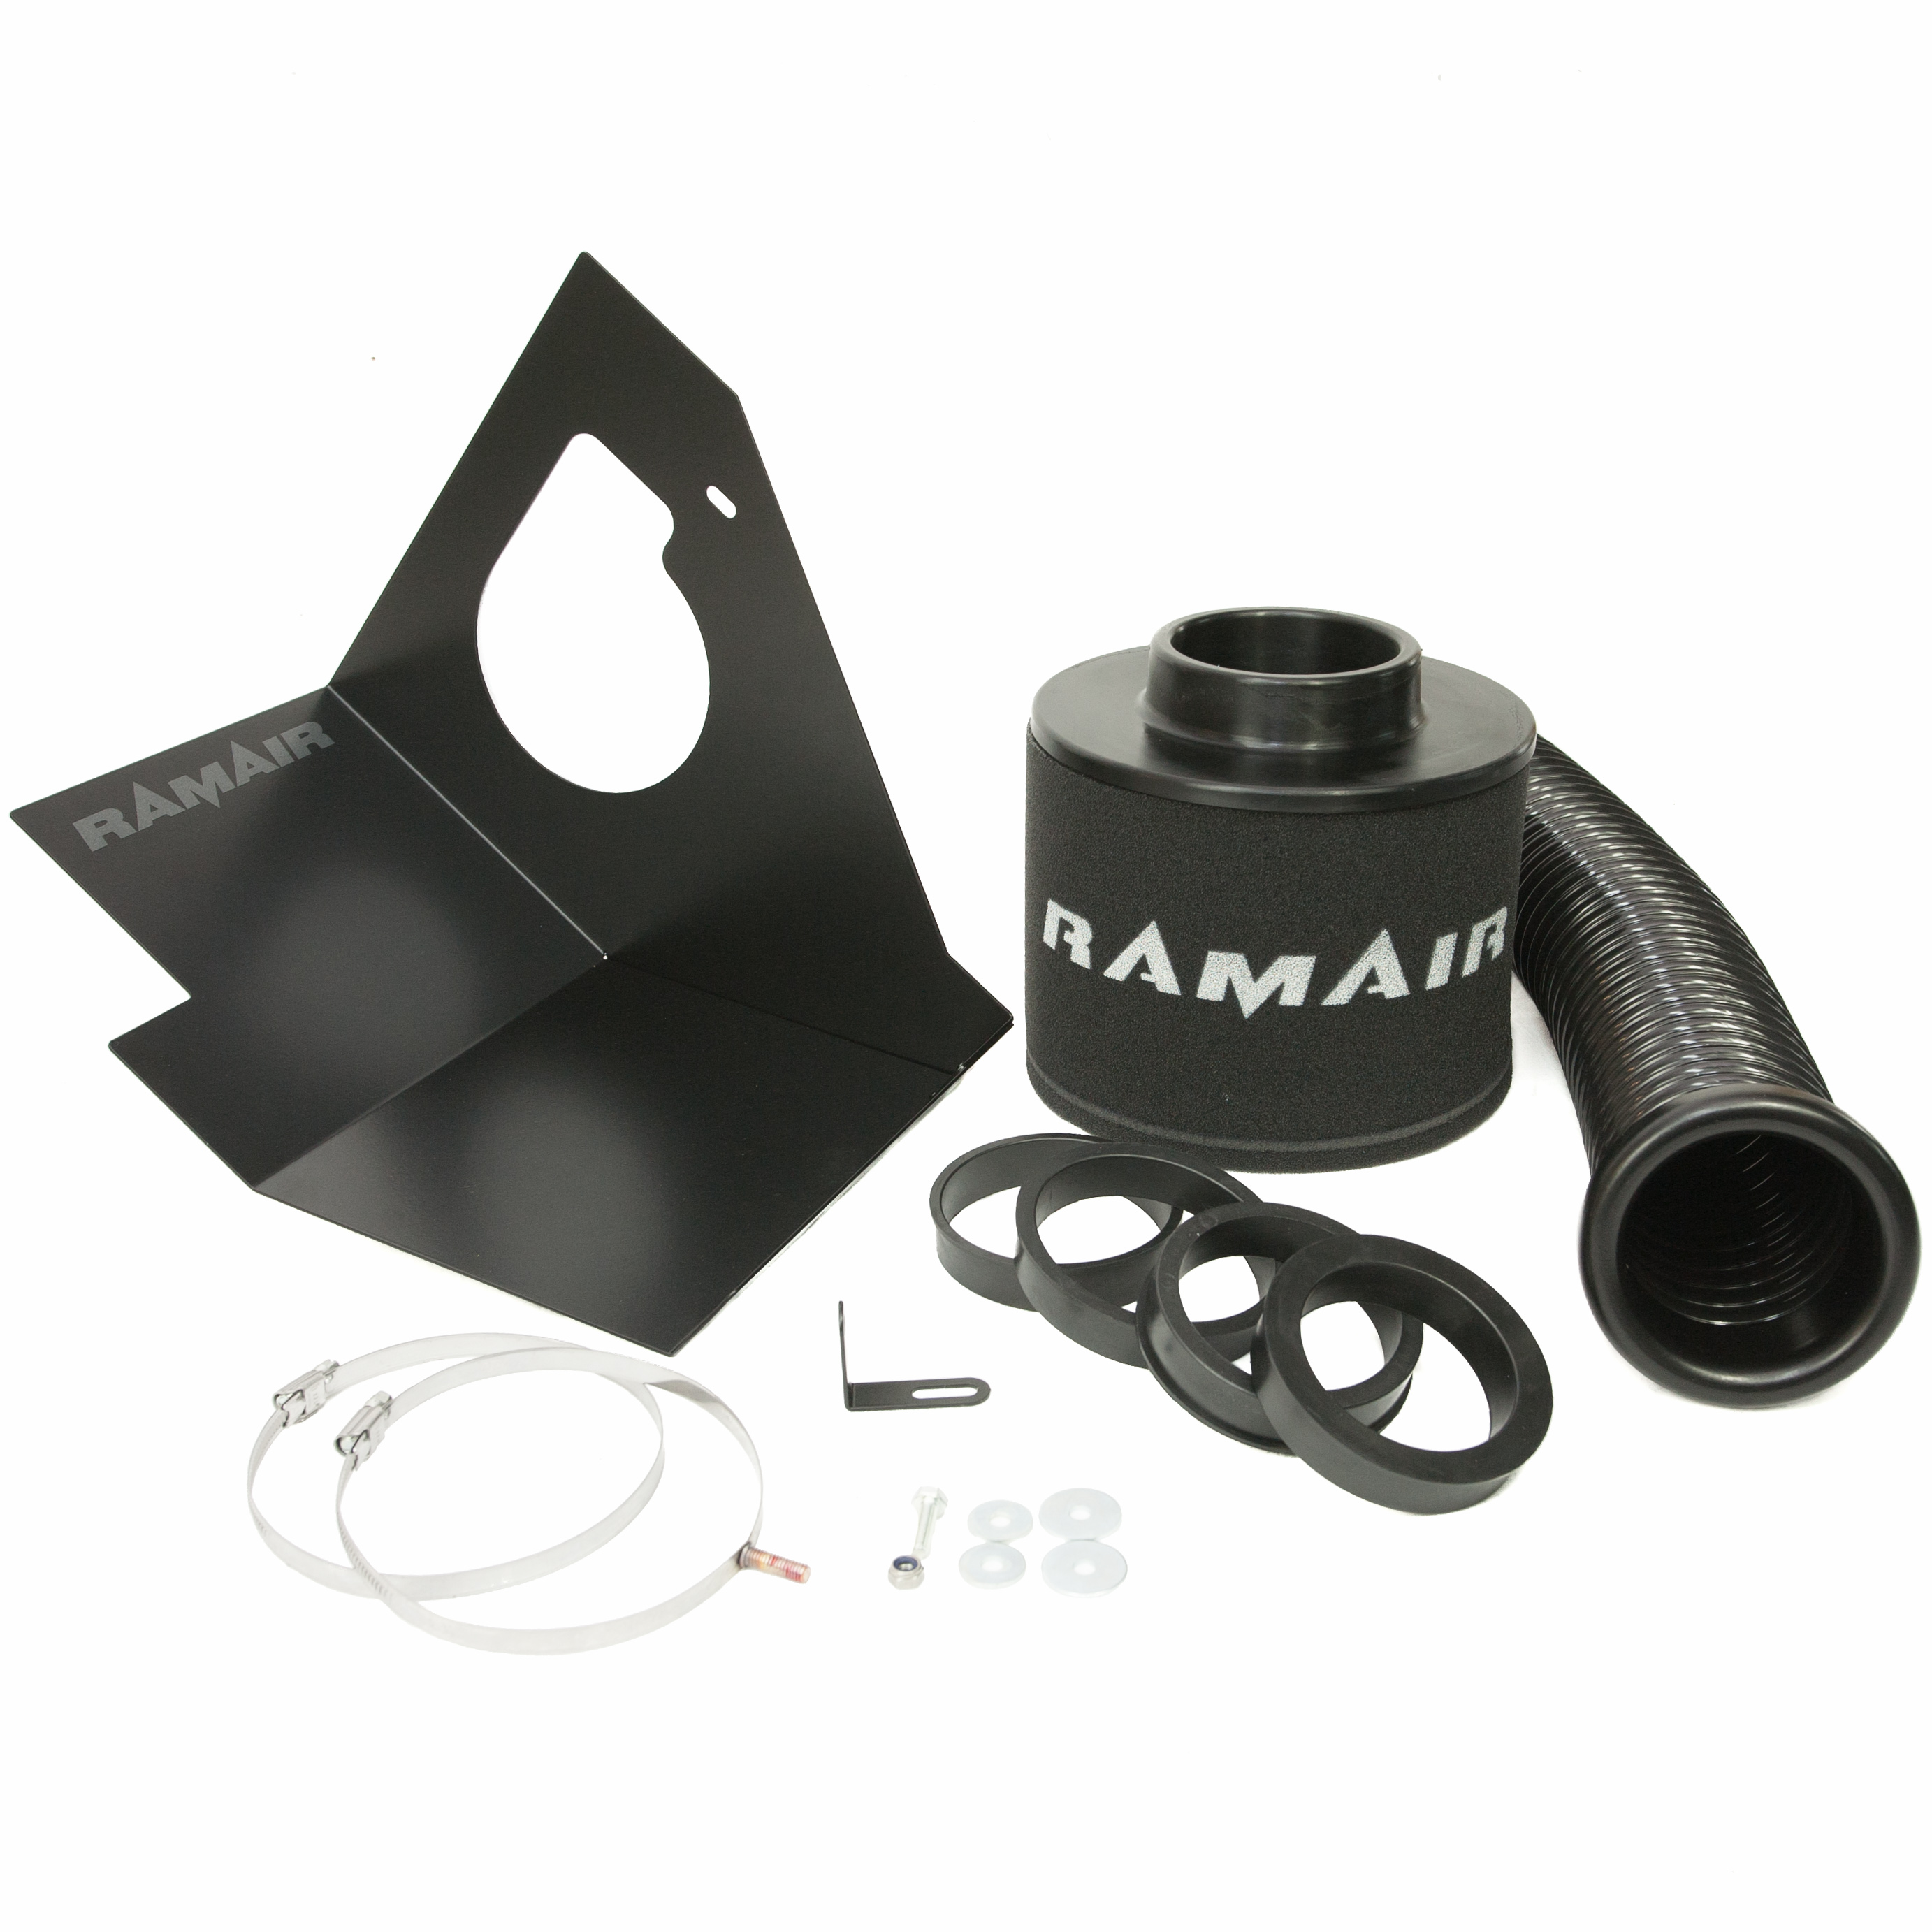 RAMAIR SR Cold Air Induction Kit for BMW 3 Series E46 320Ci Models 1999-2006 